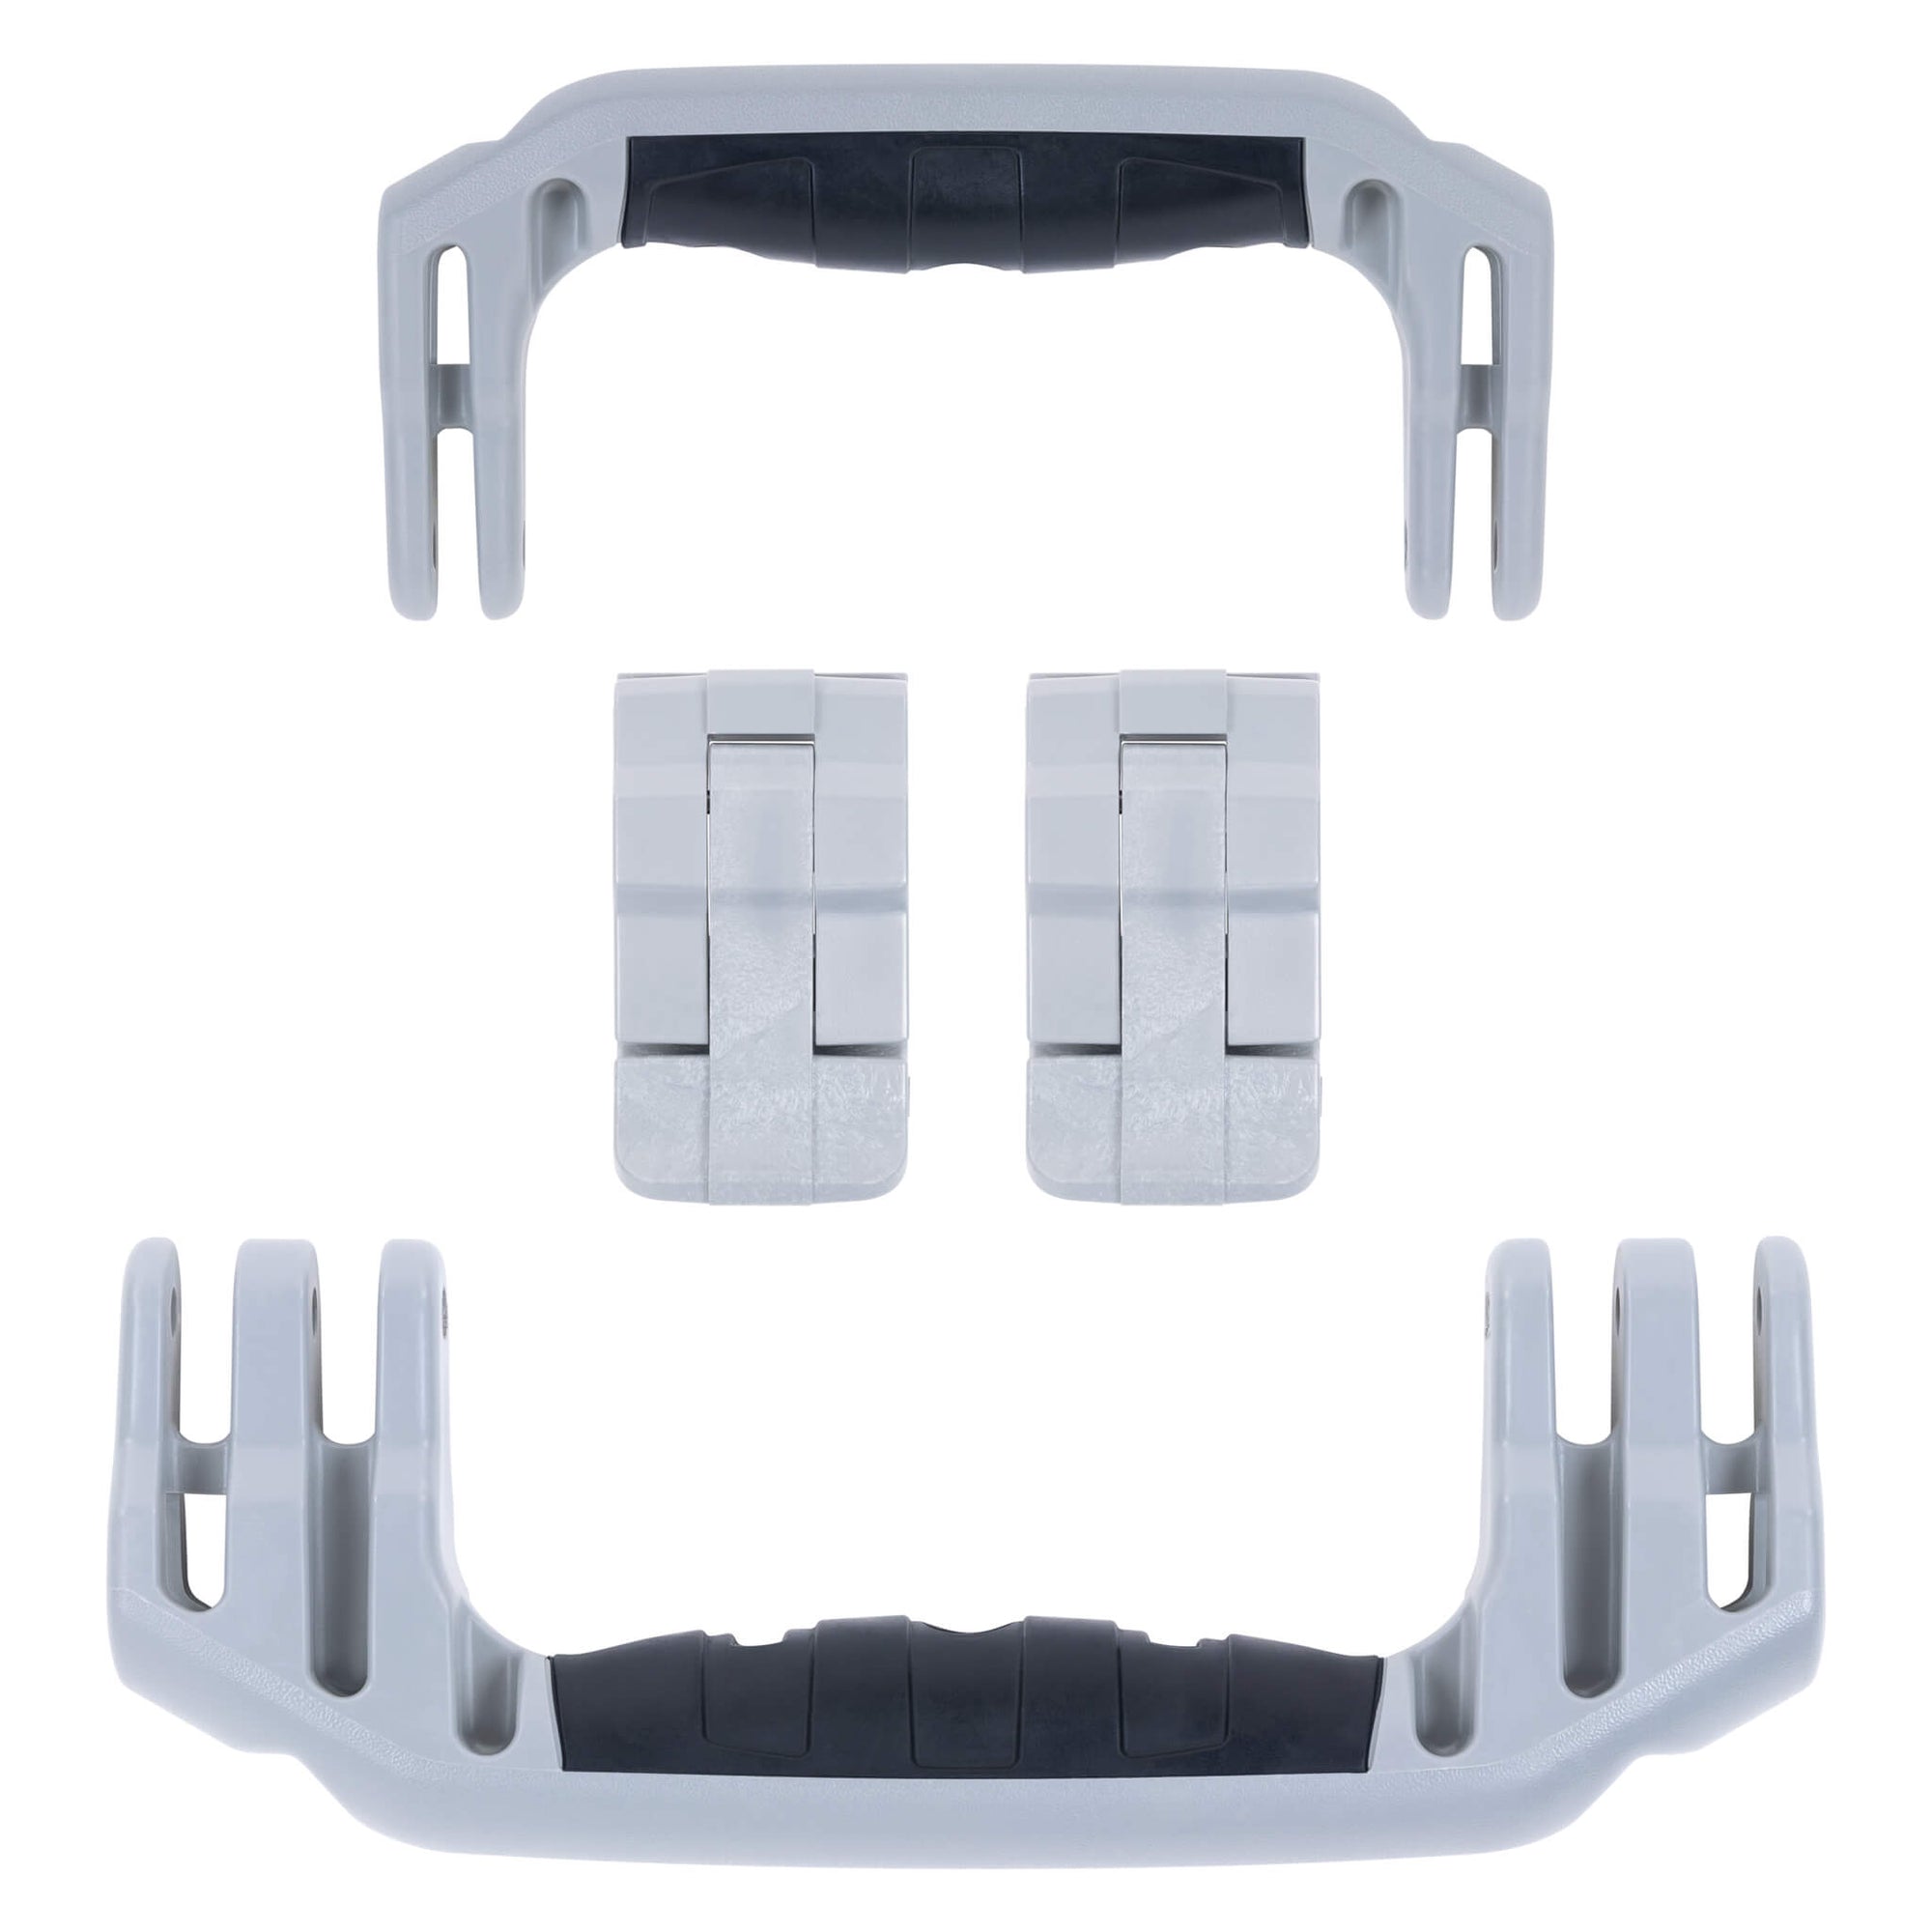 Pelican 1510 Replacement Handles & Latches, Silver (Set of 2 Handles, 2 Latches) ColorCase 